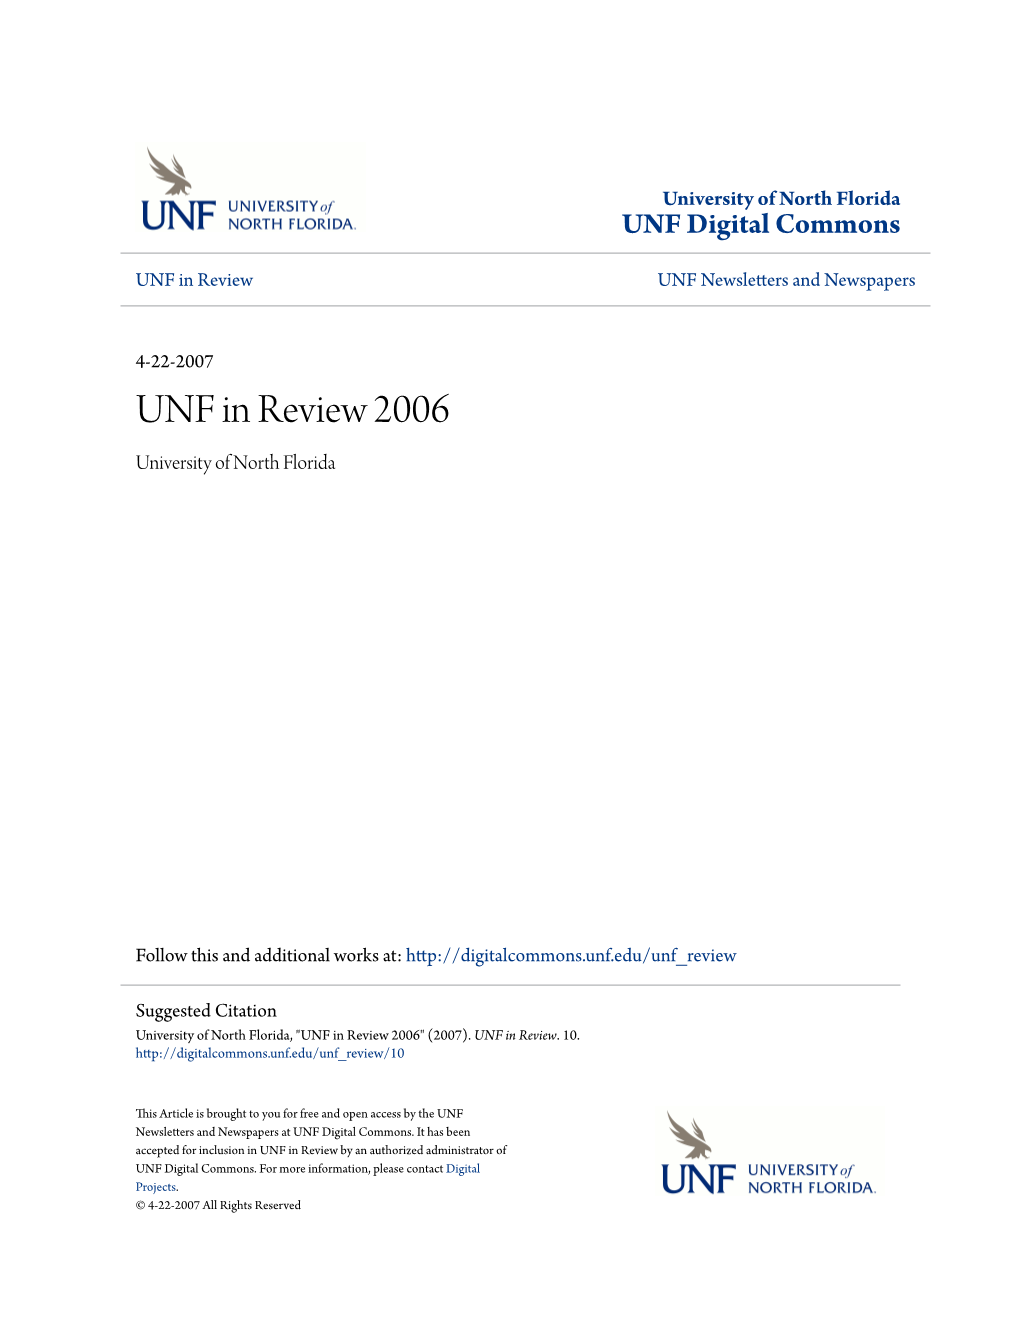 UNF in Review 2006 University of North Florida